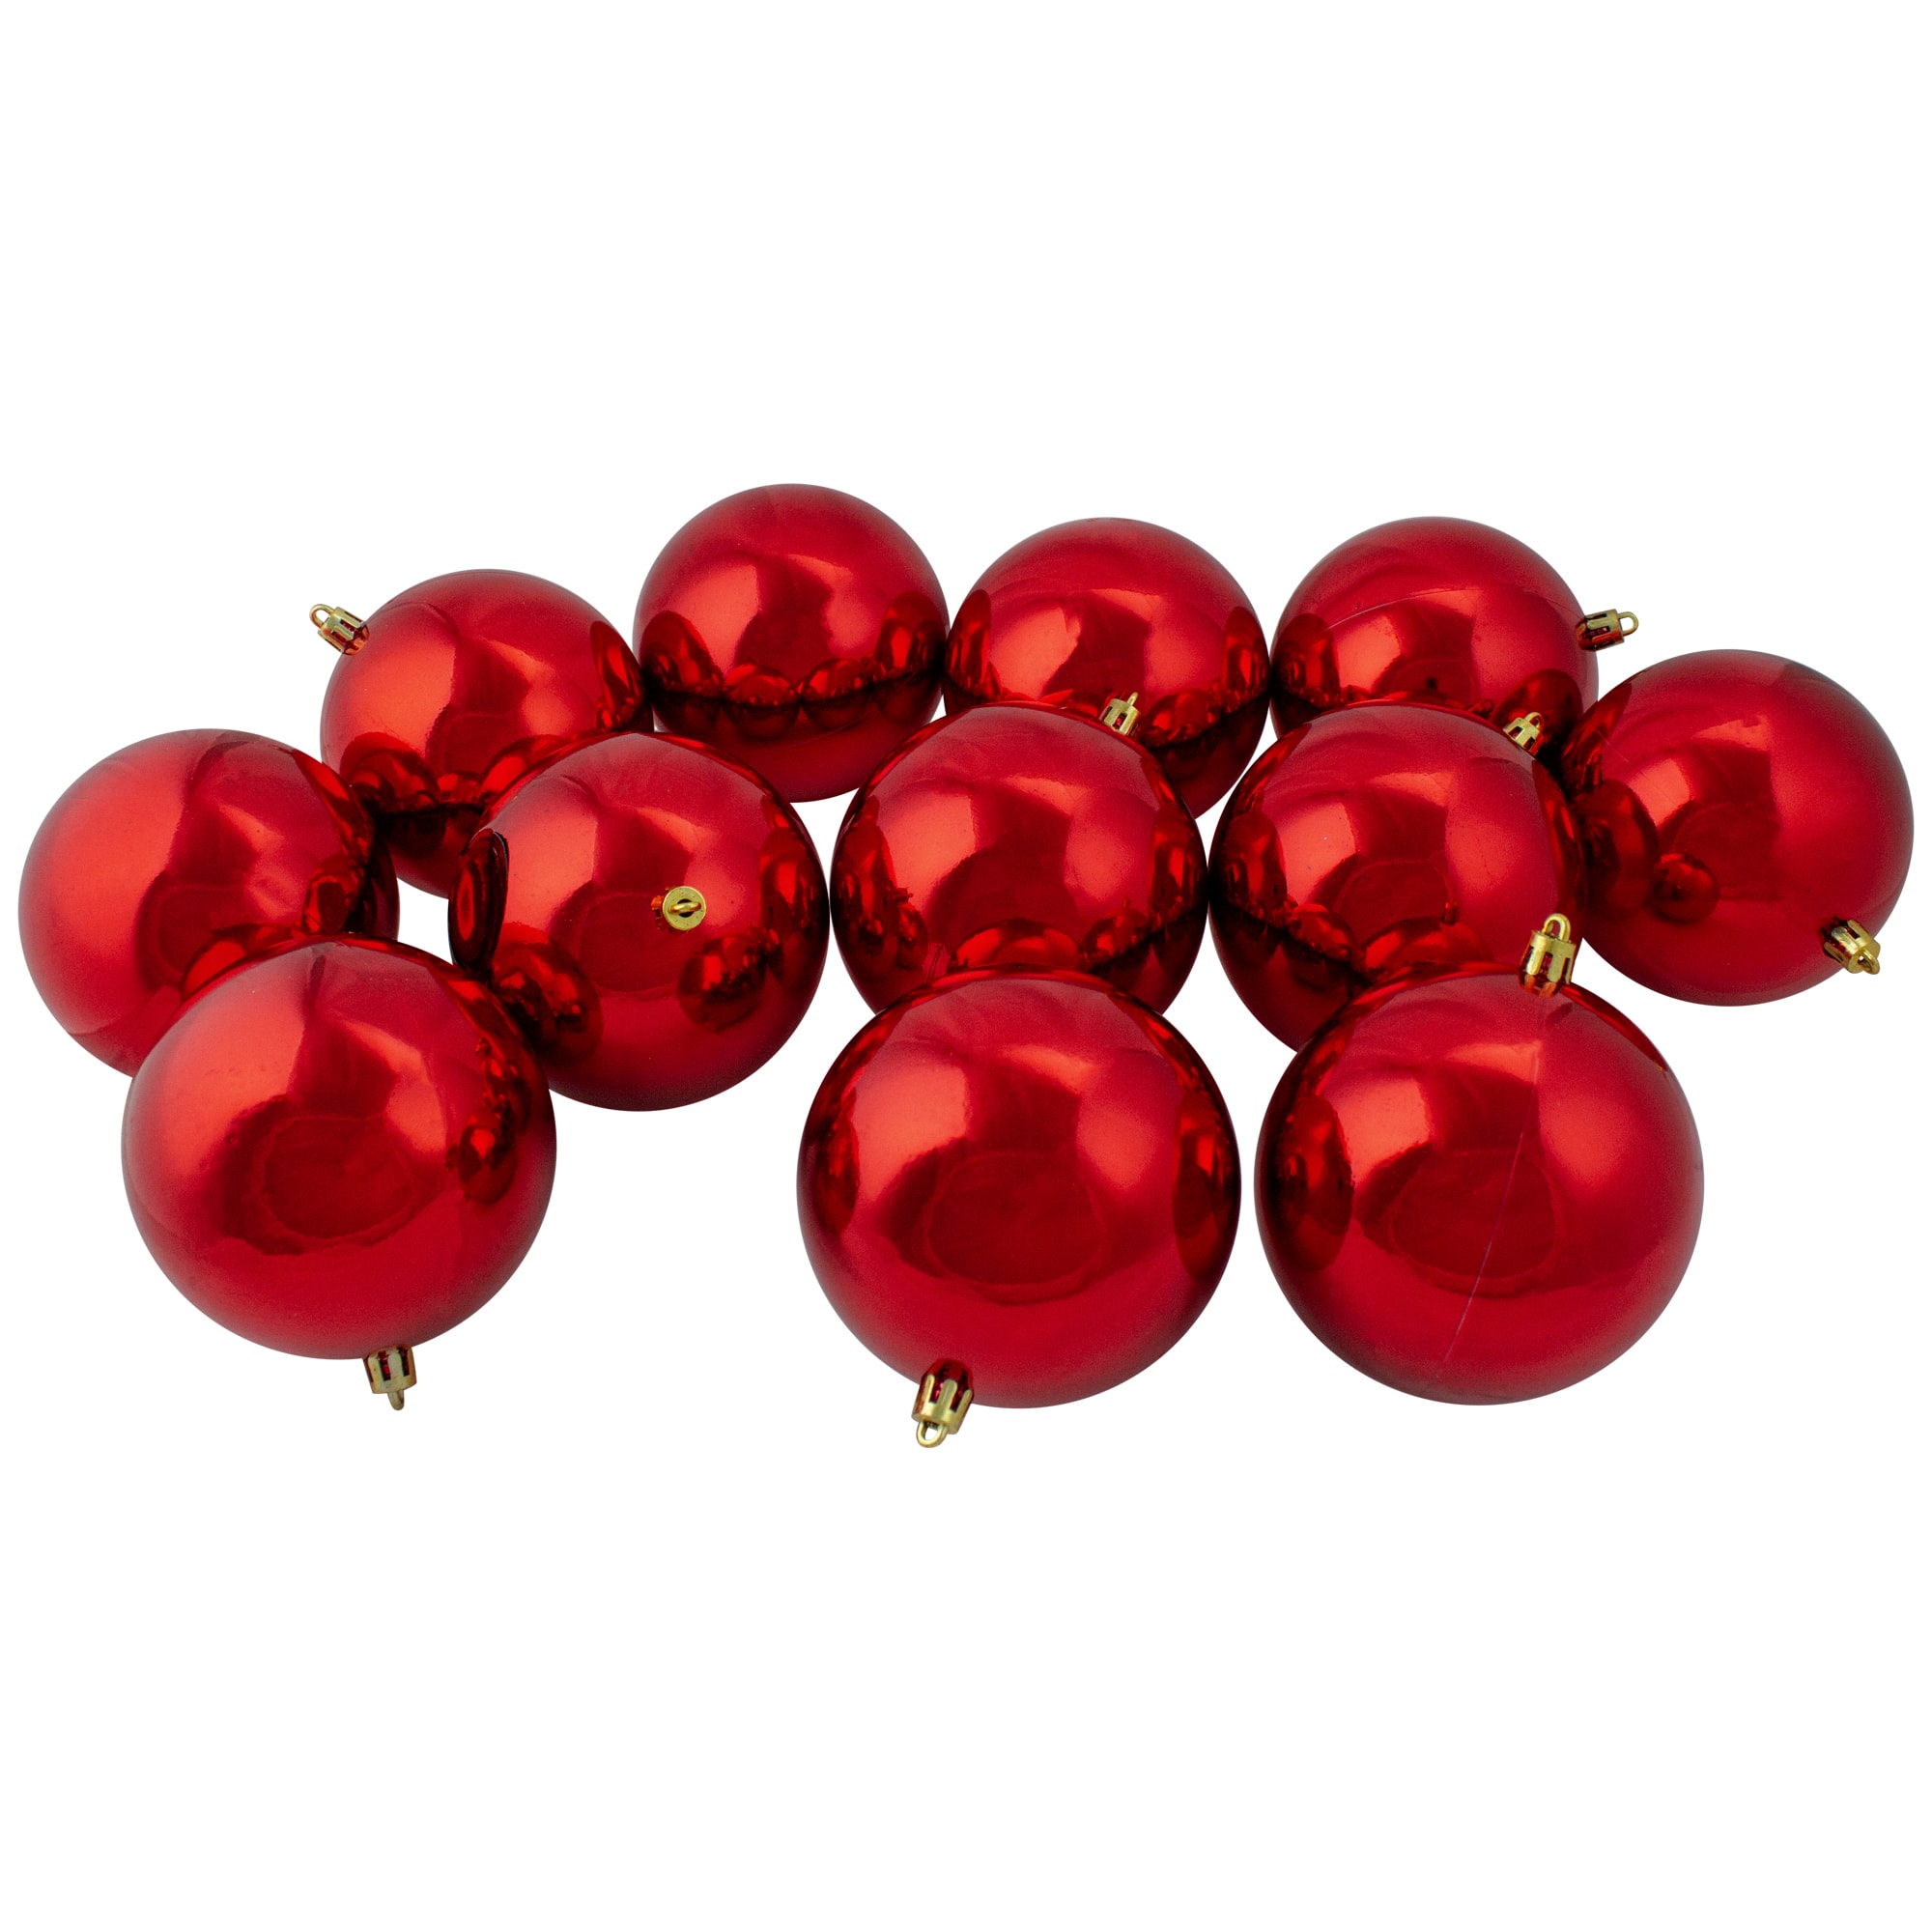 Lee Display's Brand New Shiny Red Plastic Ball Ornaments Shatterproof 280mm